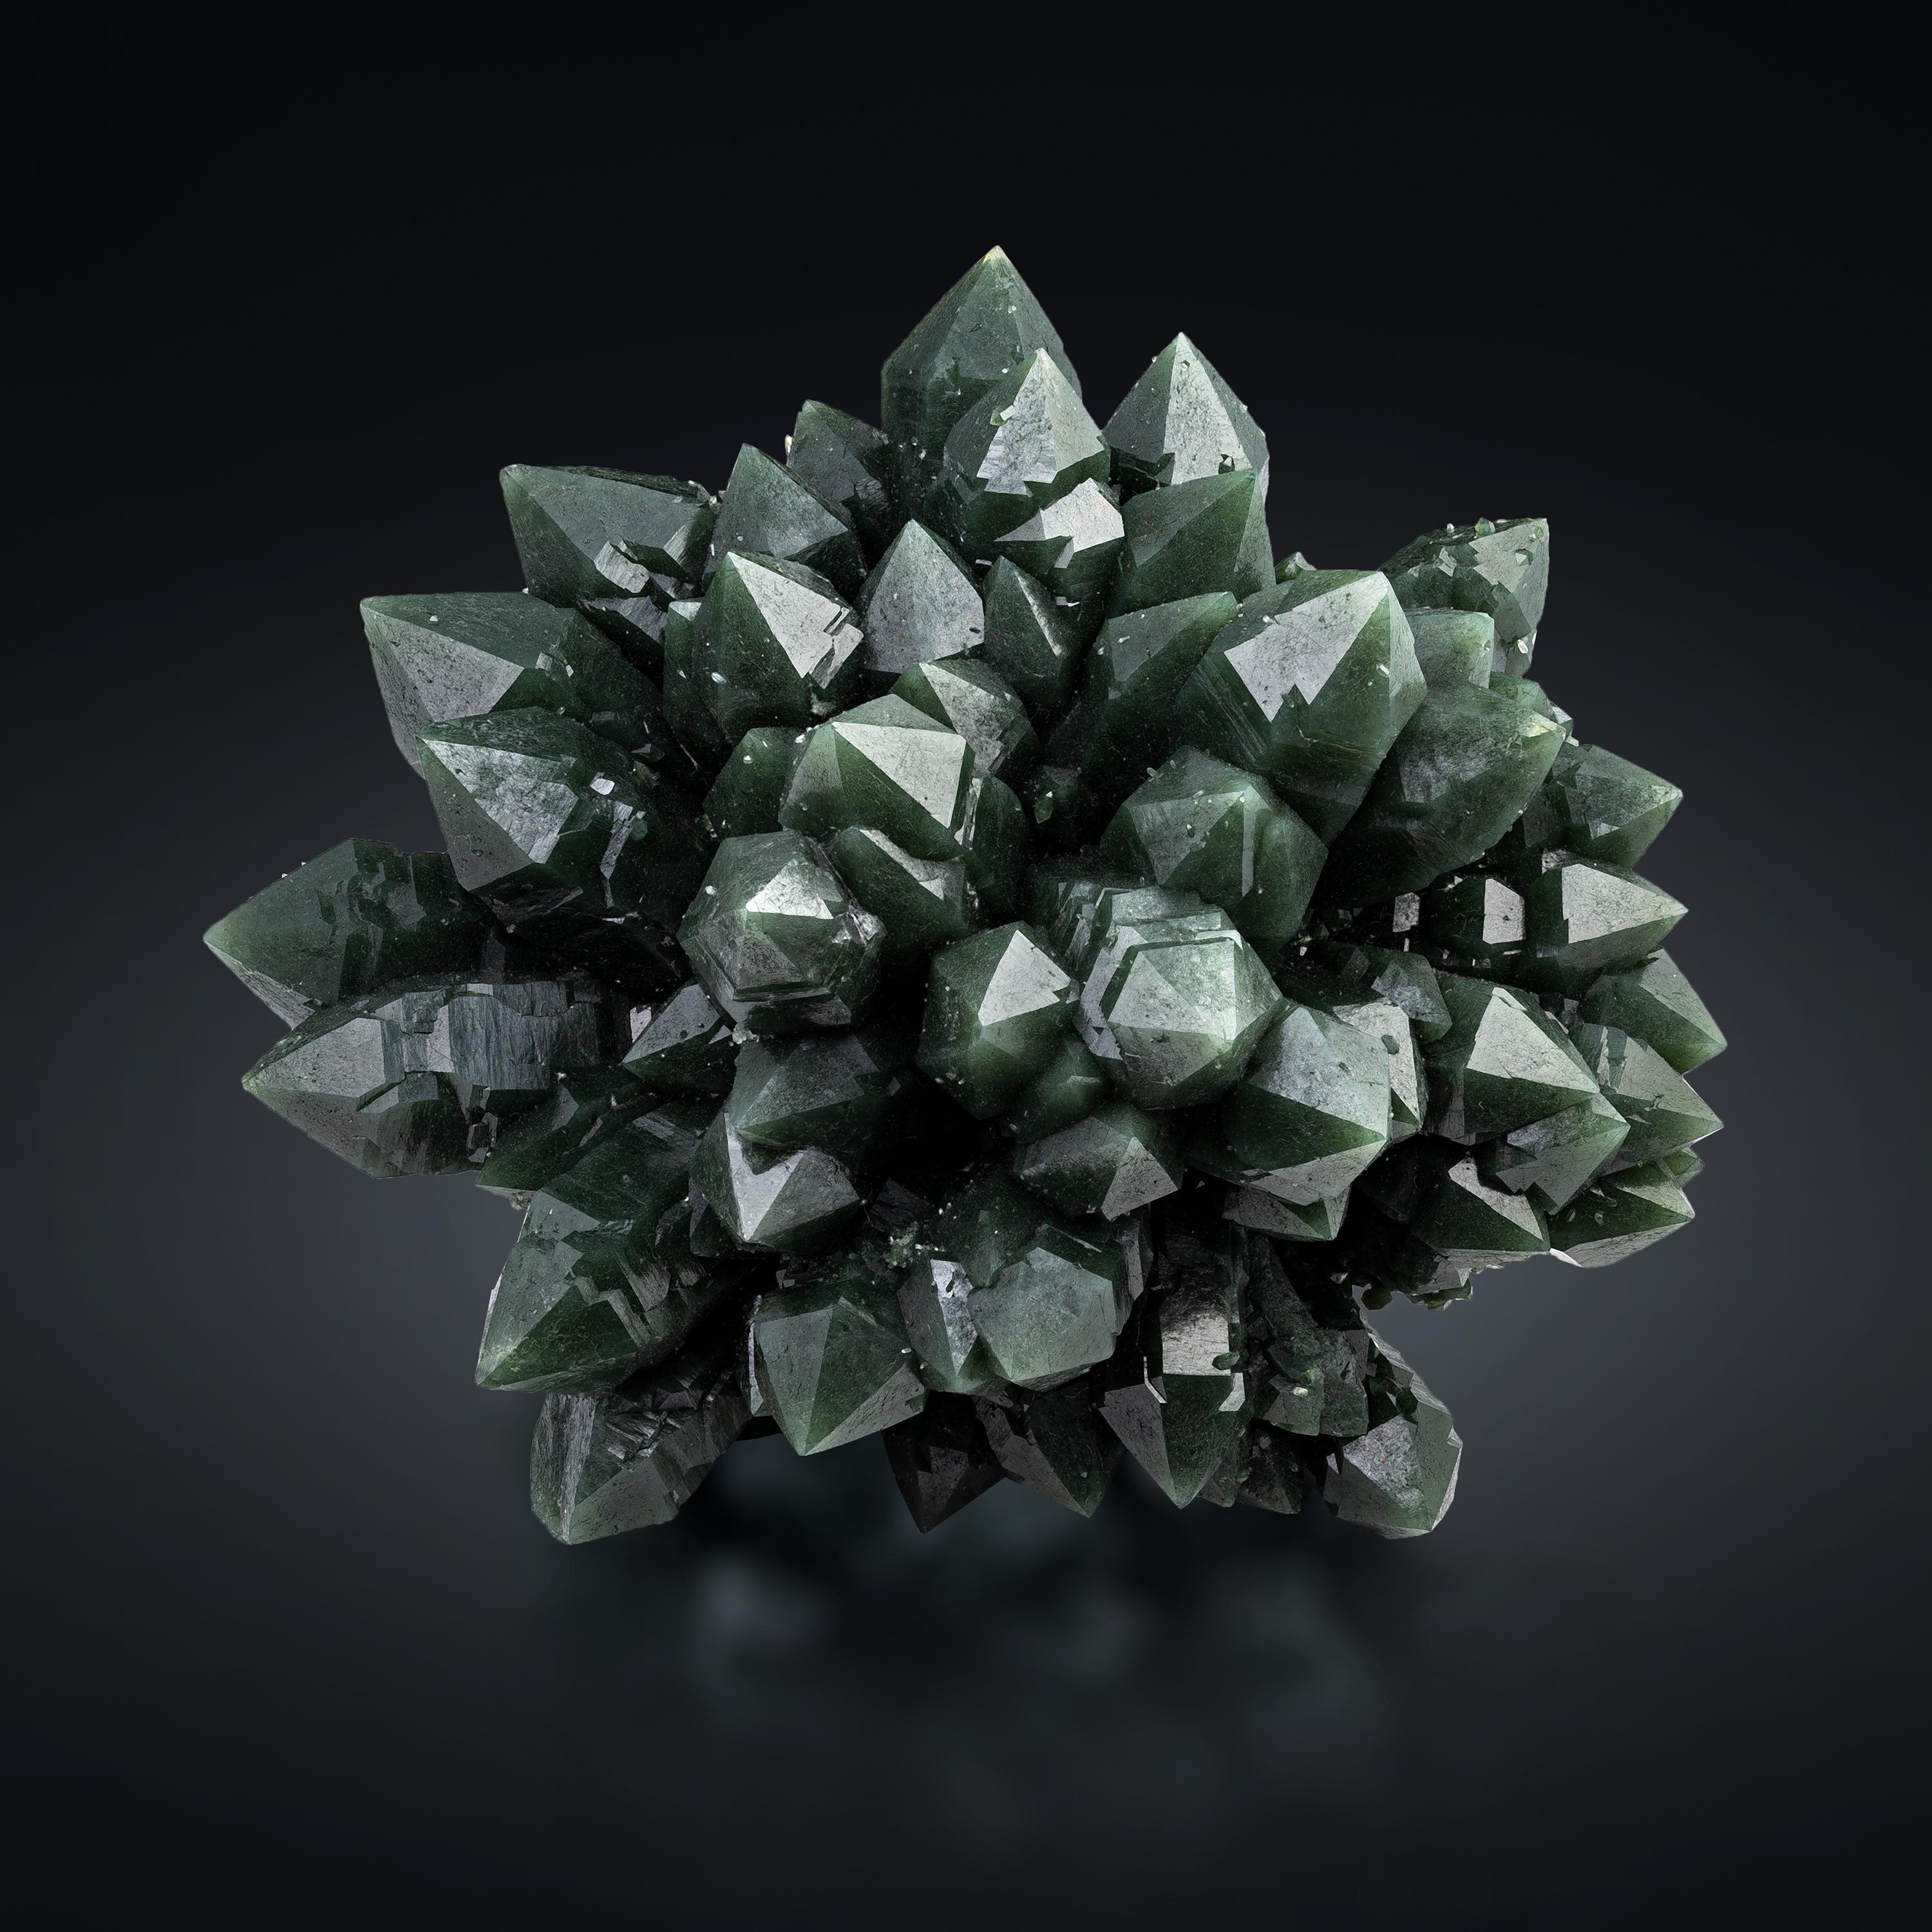 Quartz can be found in nearly every corner of the earth, yet despite its abundance, there are some rarer varieties of quartz that differentiate themselves with their distinctive color and form. Quartz with a green color is called “prasiolite,”